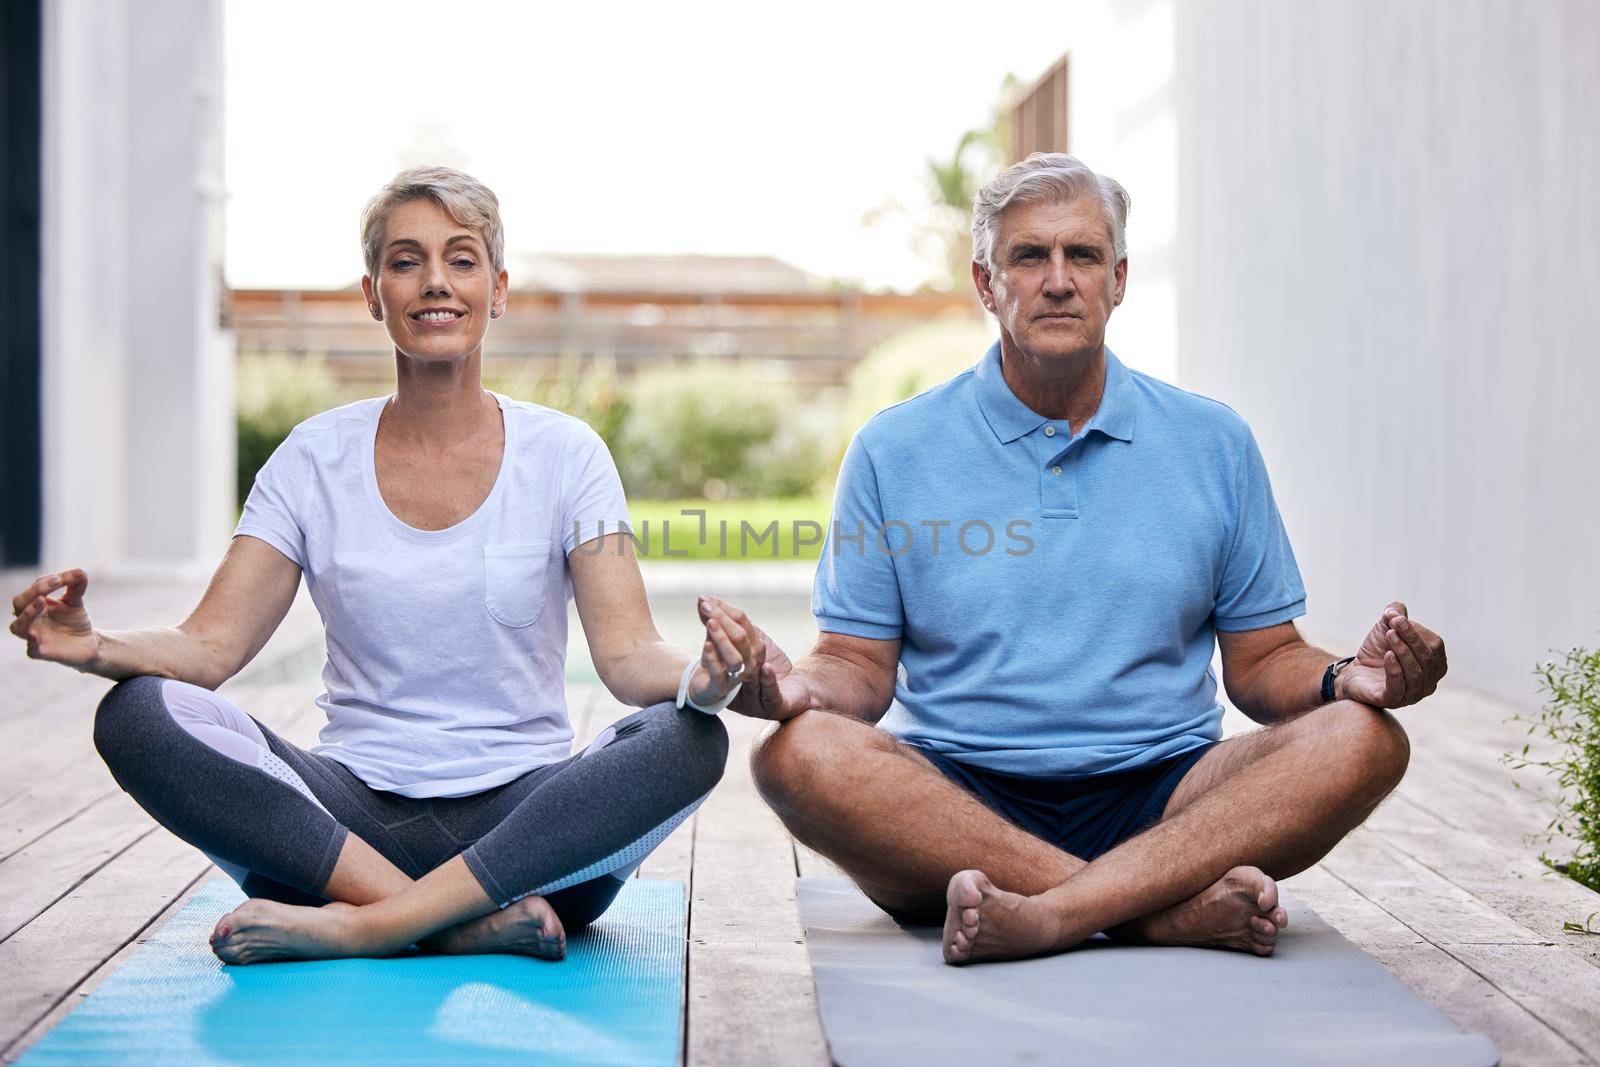 Yoga keeps mind and body sharper. Shot of a mature couple meditating together outdoors. by YuriArcurs